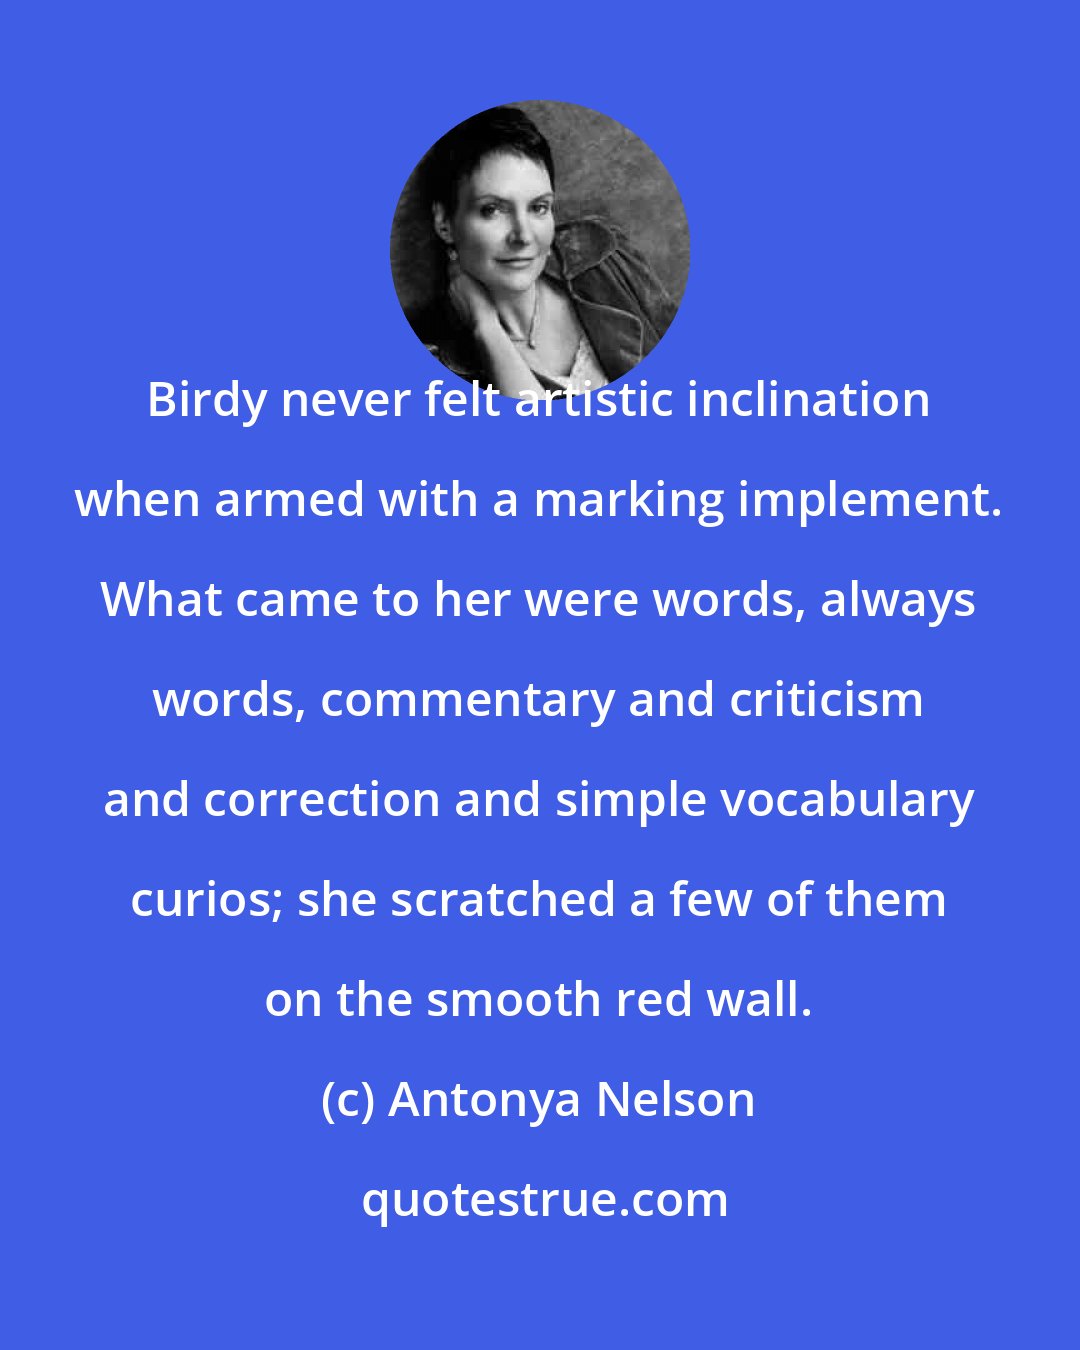 Antonya Nelson: Birdy never felt artistic inclination when armed with a marking implement. What came to her were words, always words, commentary and criticism and correction and simple vocabulary curios; she scratched a few of them on the smooth red wall.